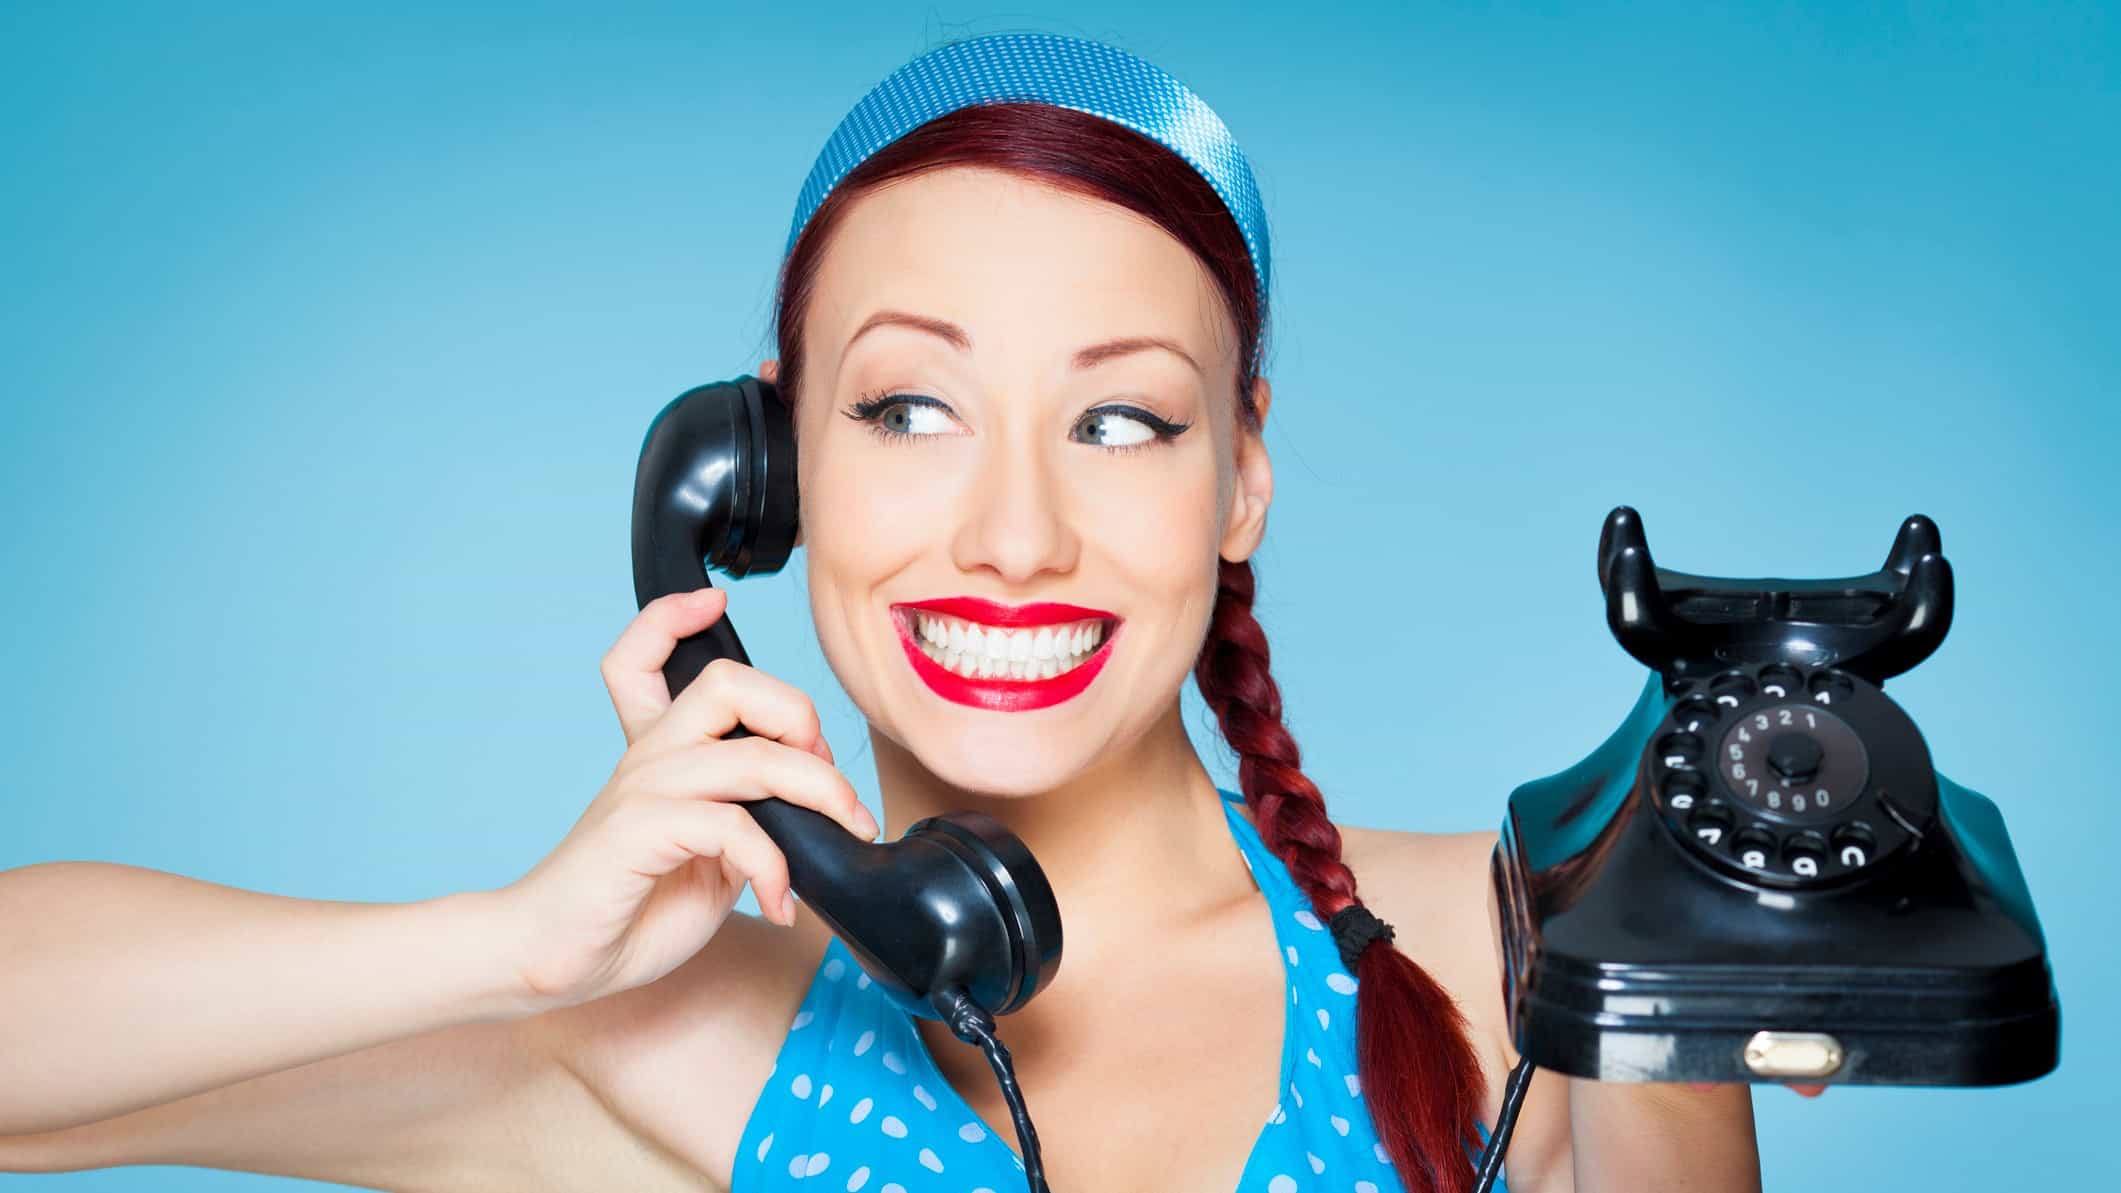 A woman smiles widely while using an old fashioned hand set telephone with dial.